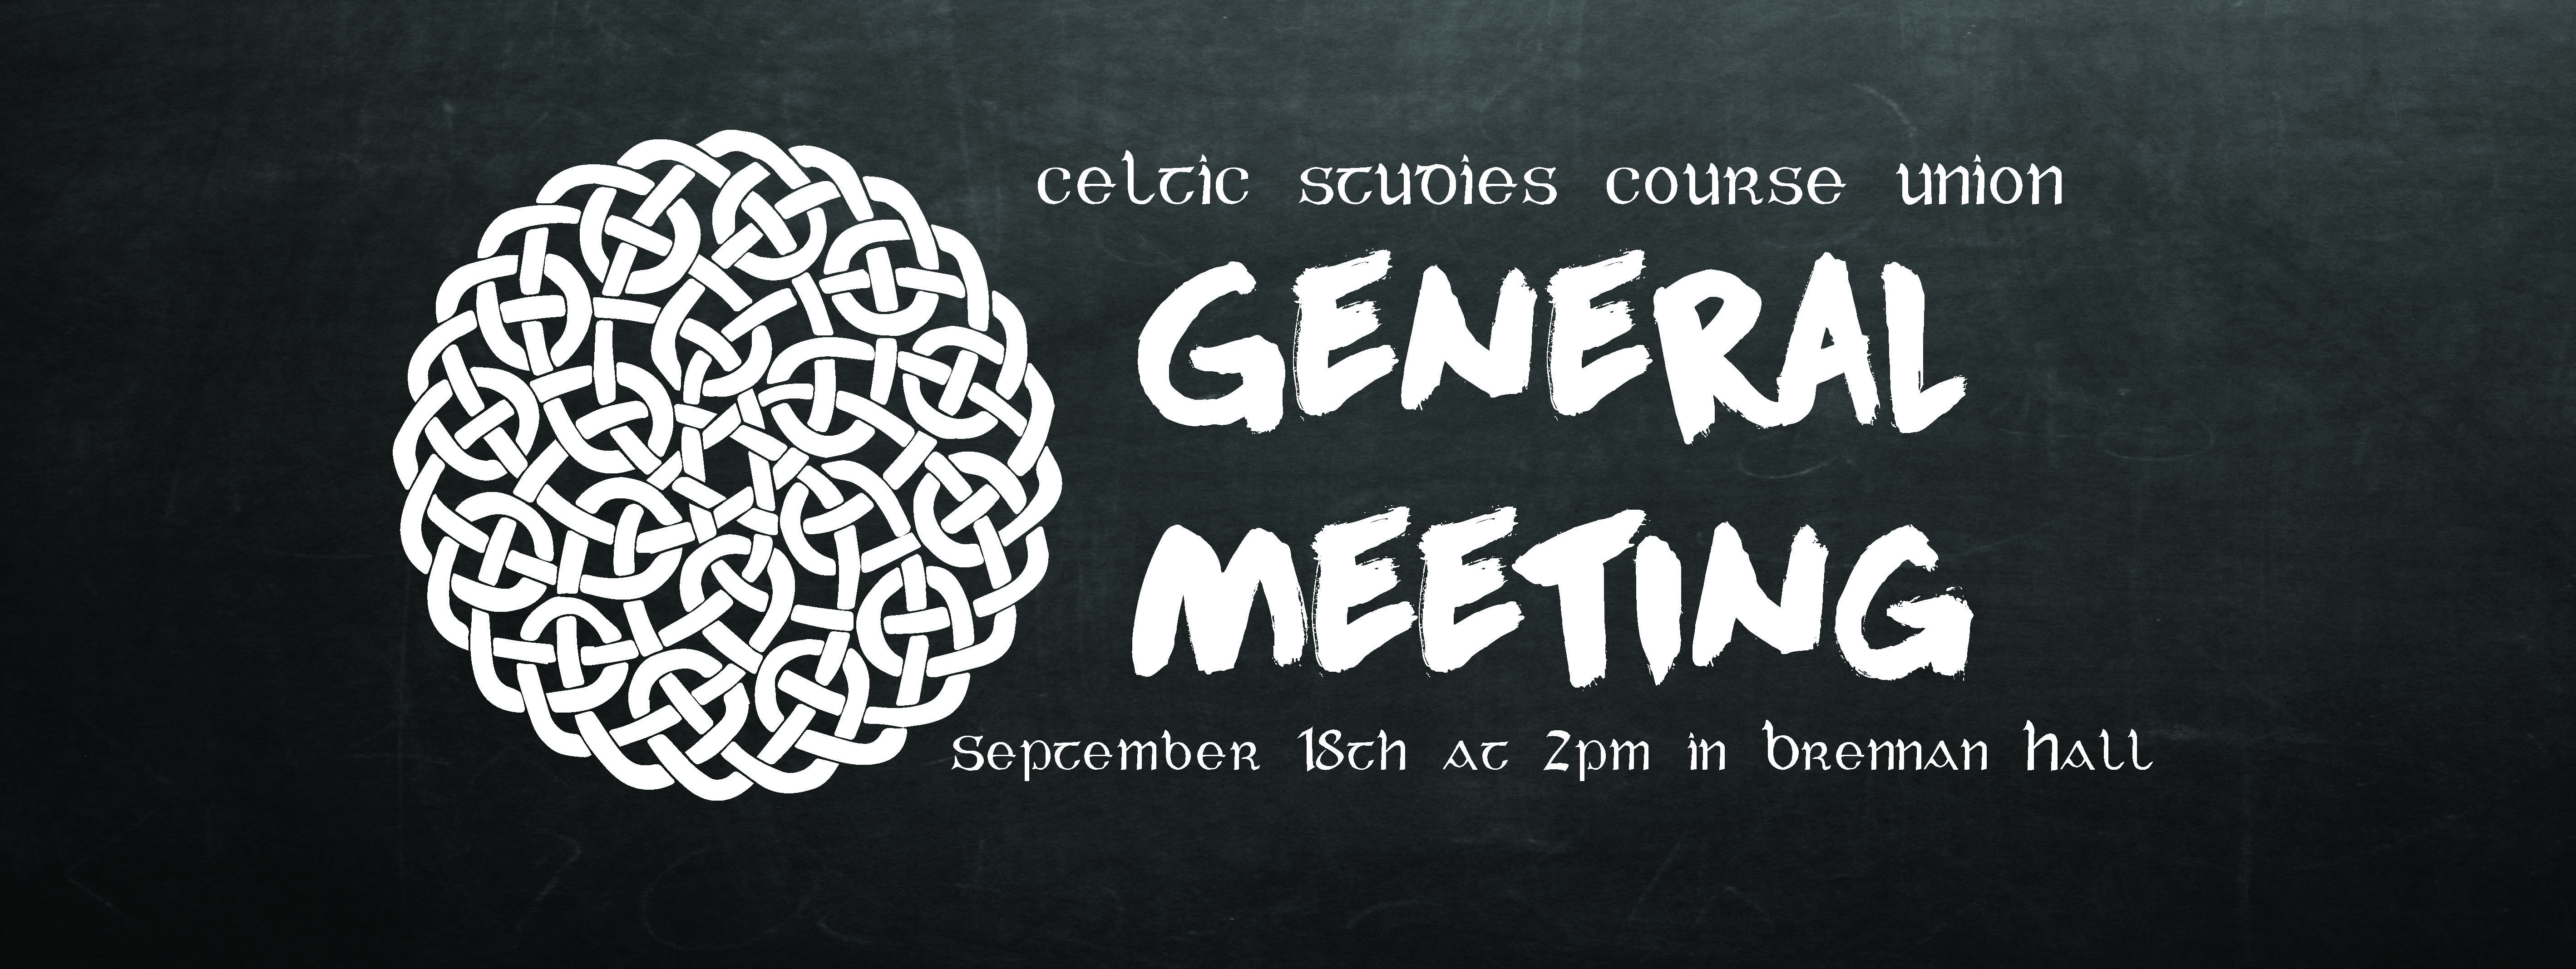 CSCU General Meeting Event Banner